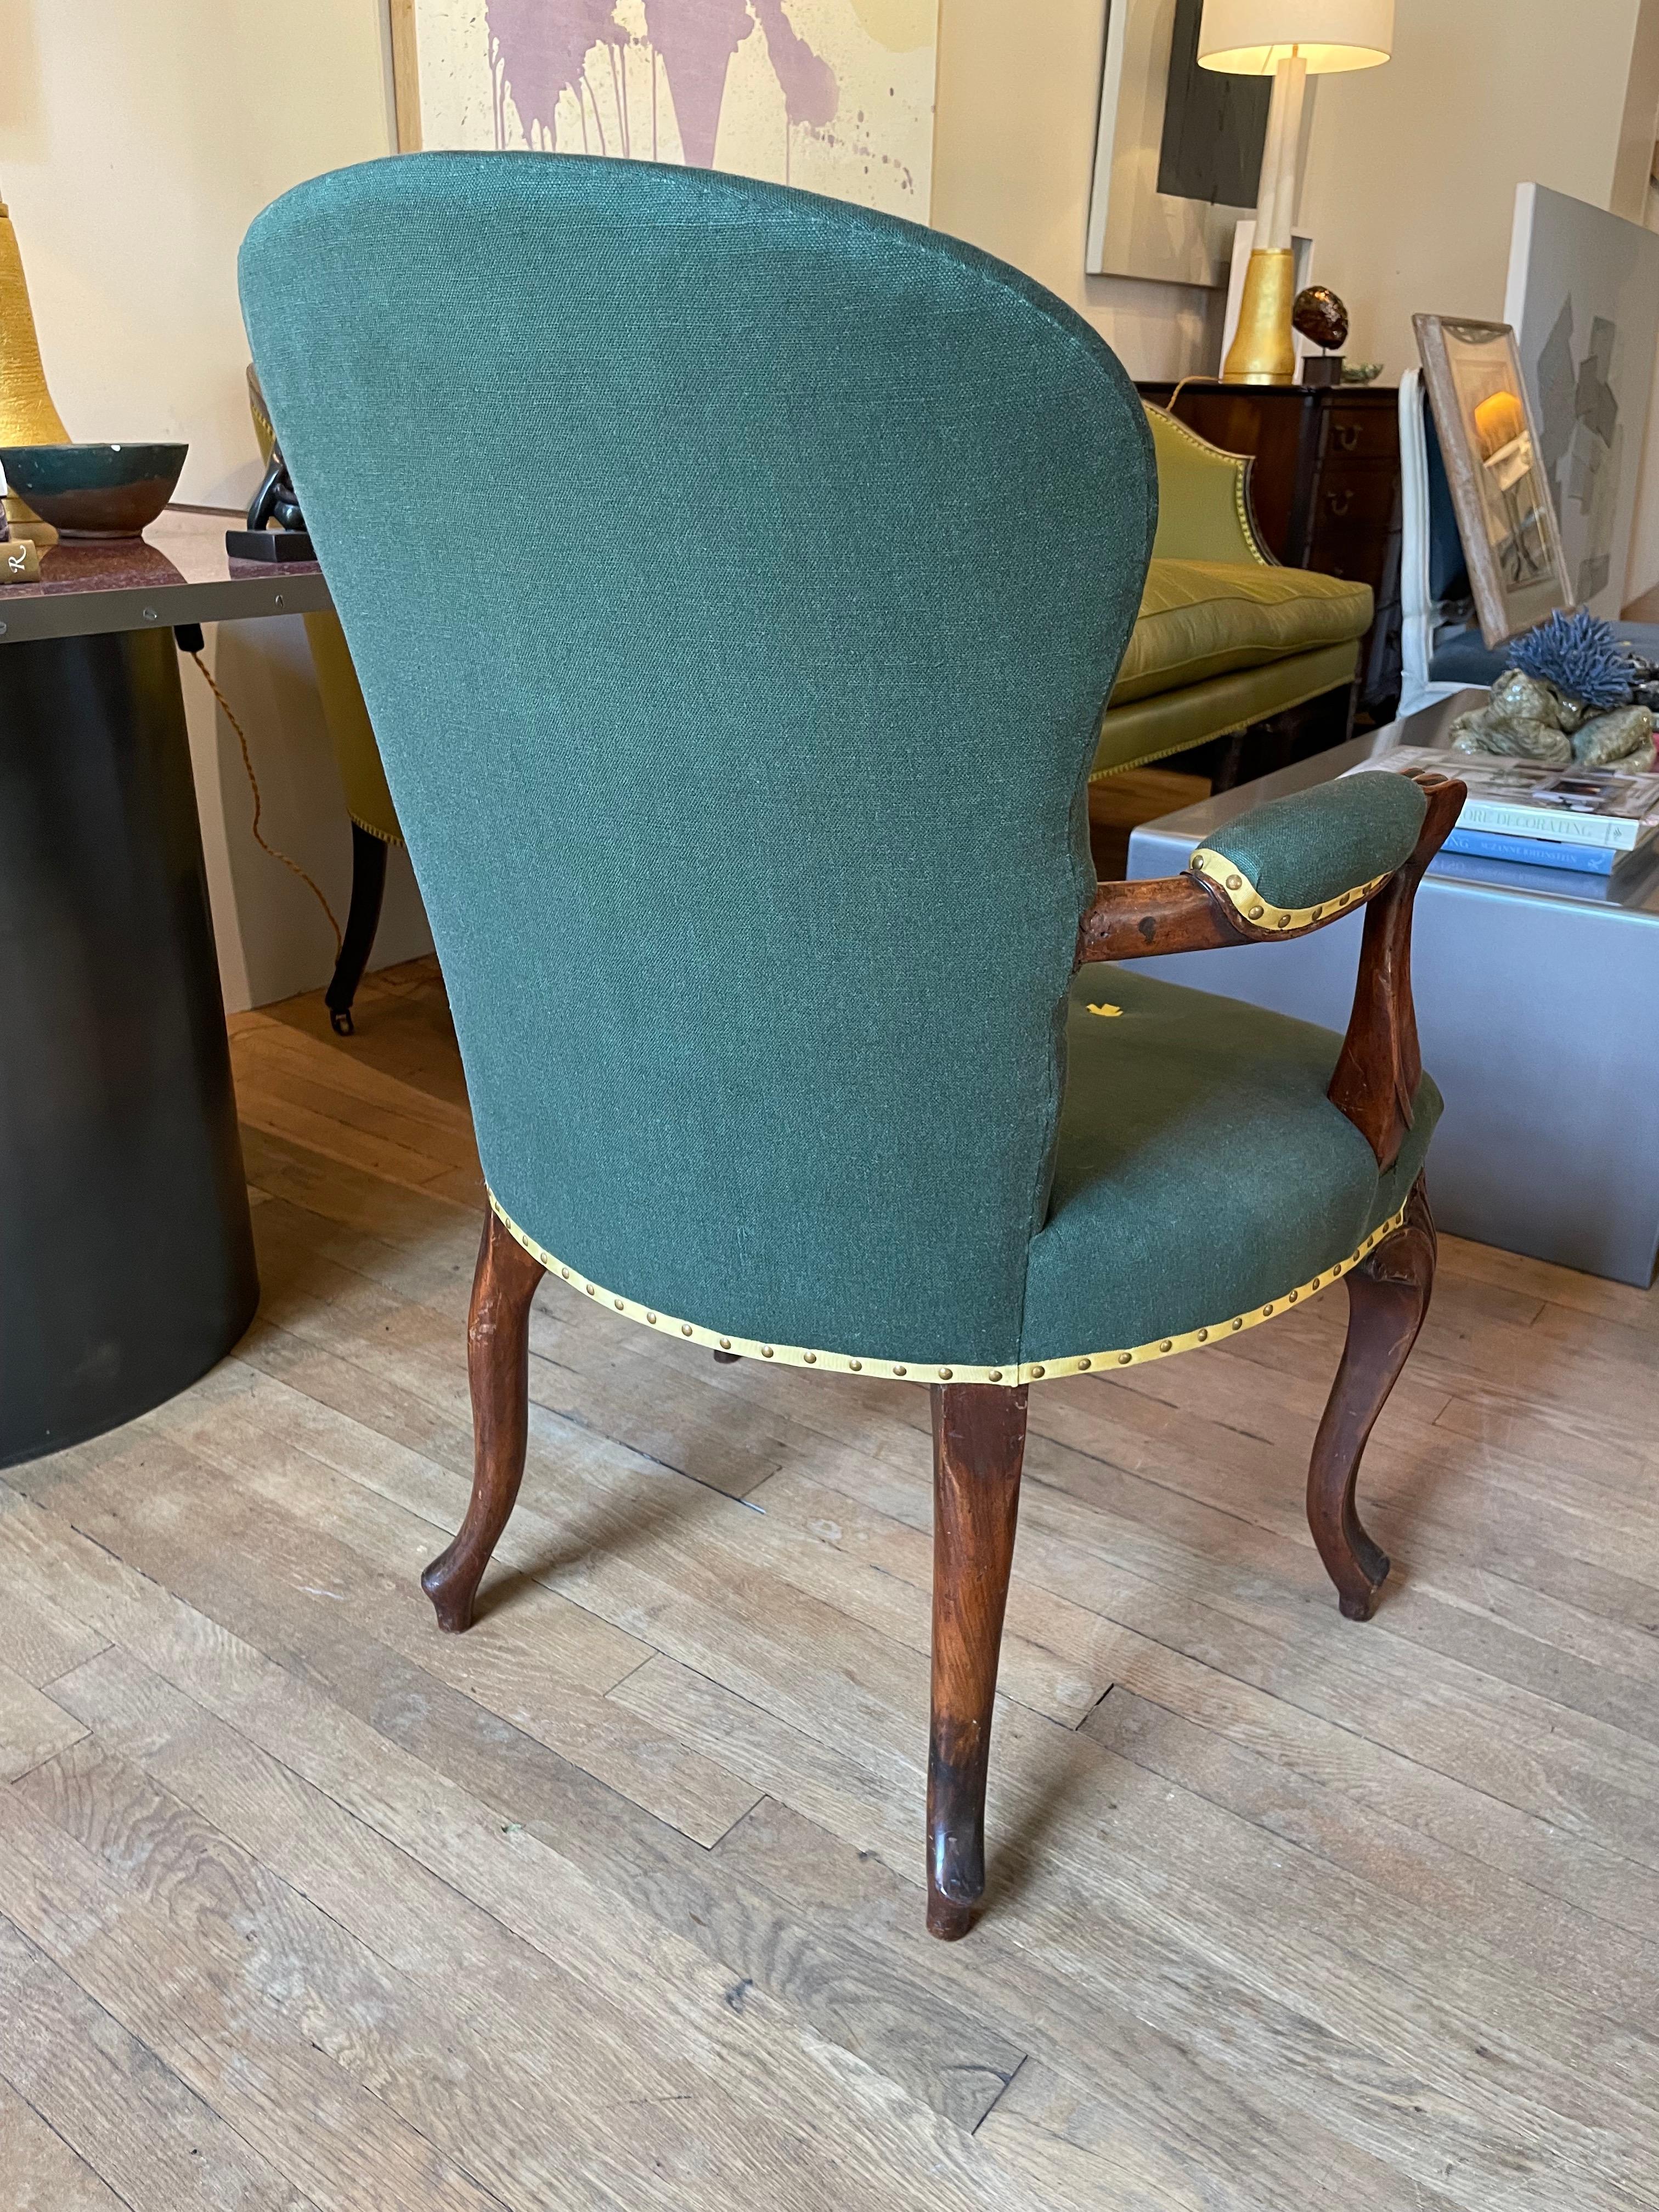 French hepplewhite mahogany armchair.
English, circa 1780.
Measures: back height: 36 in. Width: 25 in. Seat depth: 17 in. Seat height: 18 in.
2067B